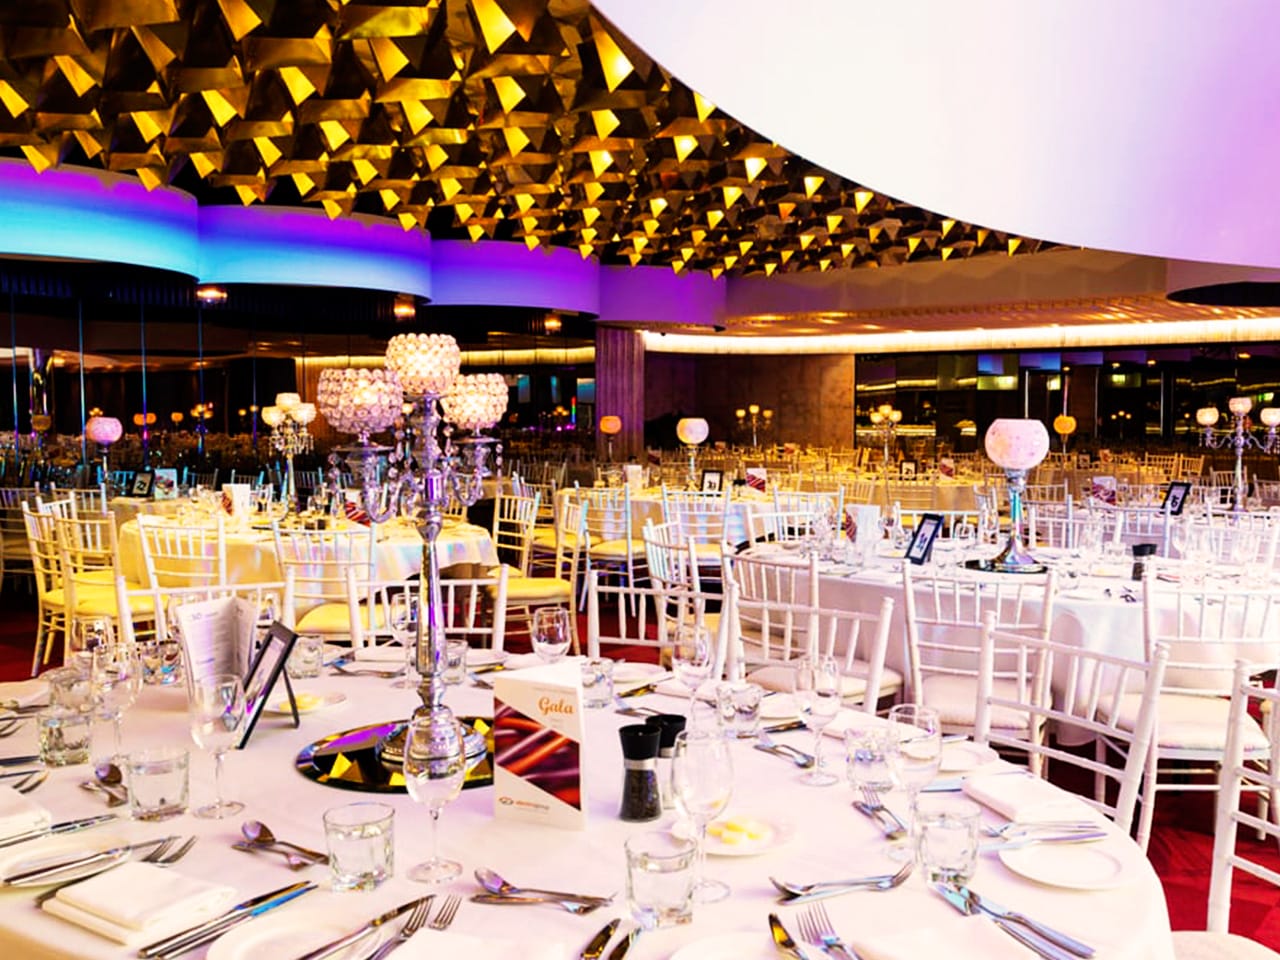 Round white tables set for an event